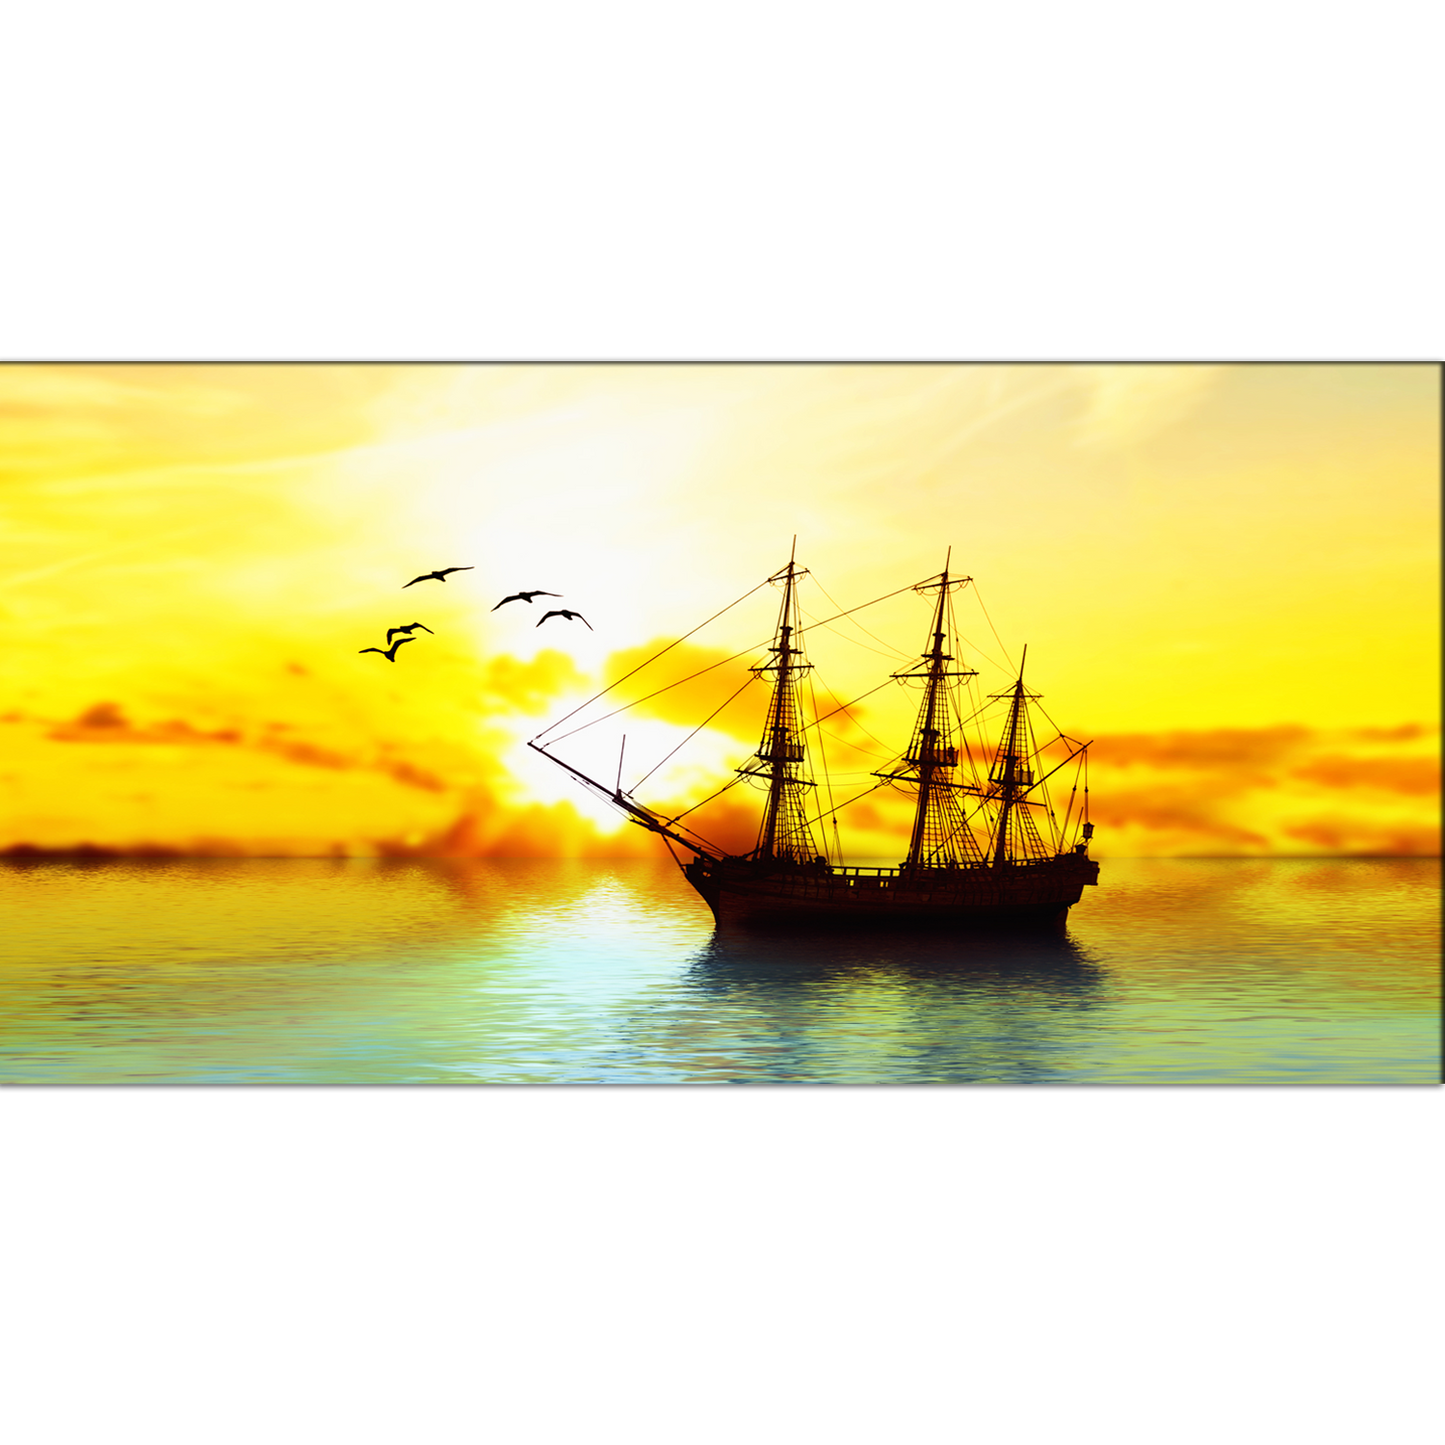 Sunset With Ship Canvas Print Wall Painting